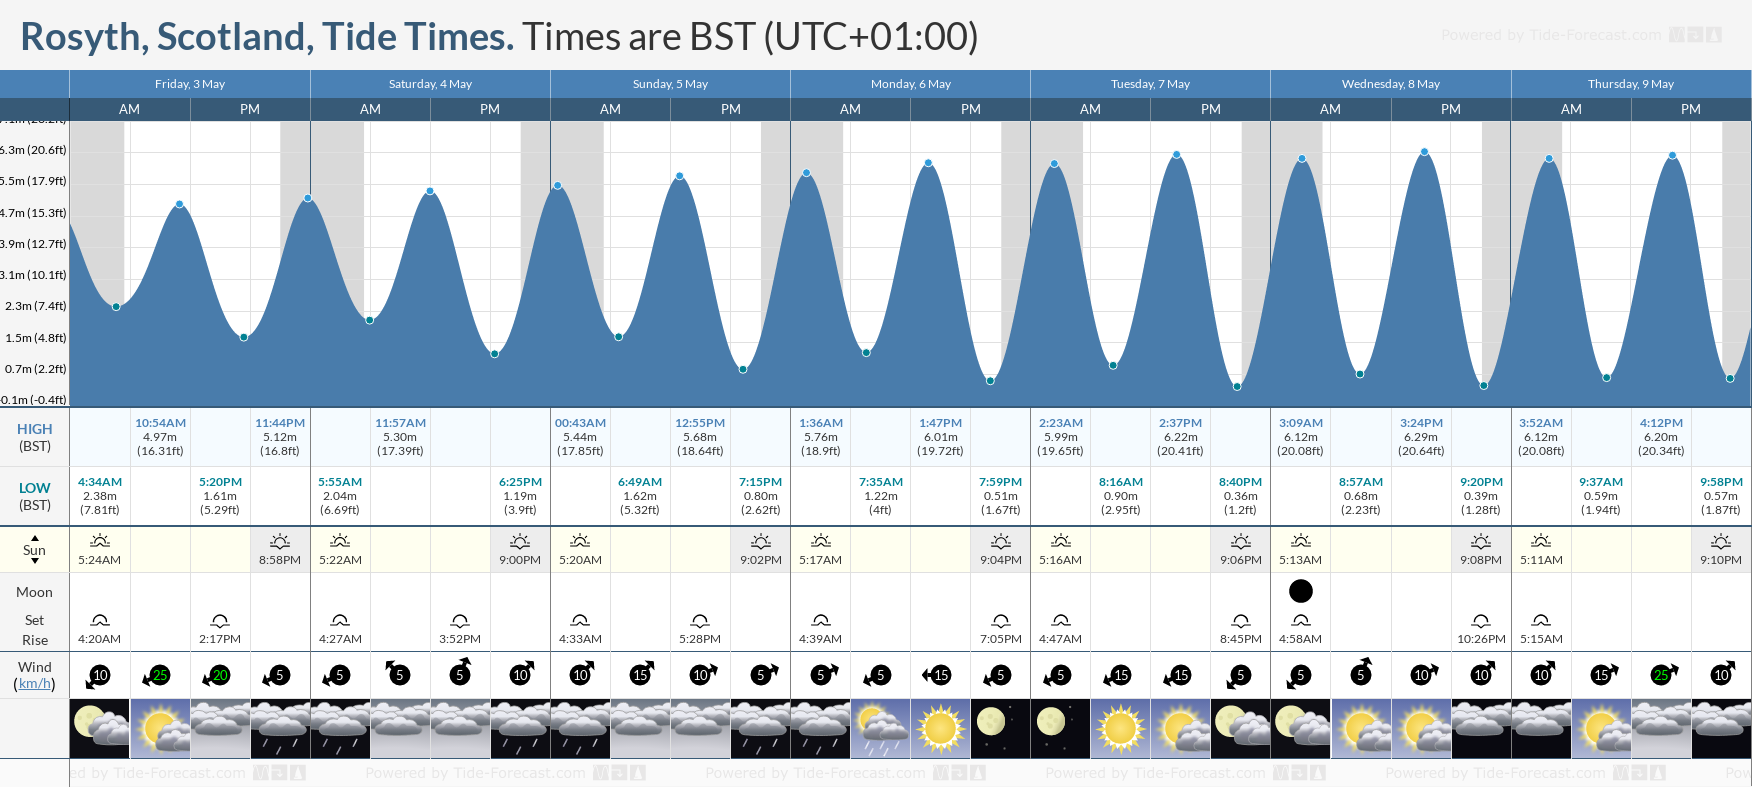 Rosyth, Scotland Tide Chart including high and low tide tide times for the next 7 days